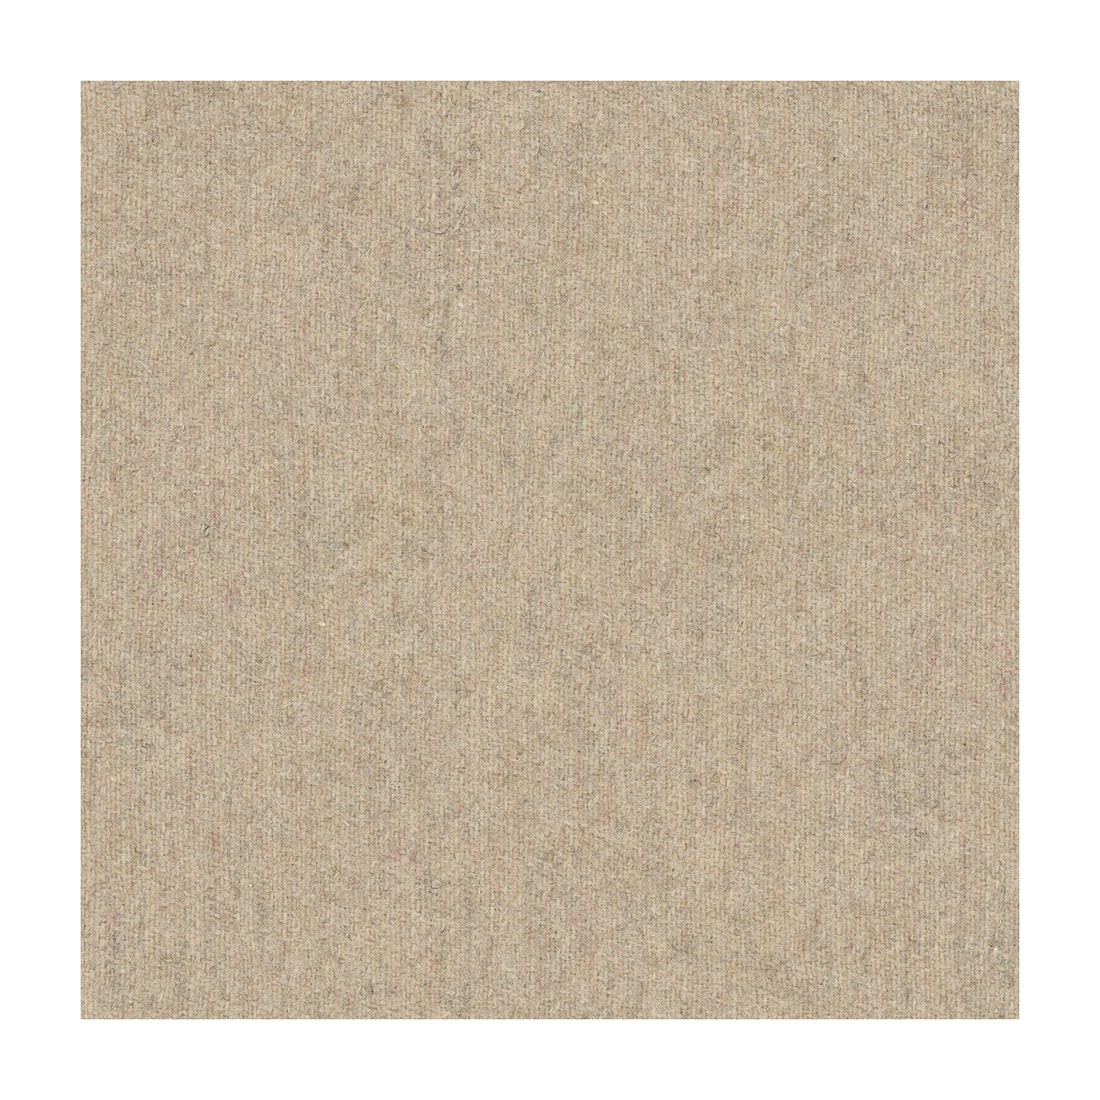 Jefferson Wool fabric in biscotti color - pattern 34397.1616.0 - by Kravet Contract